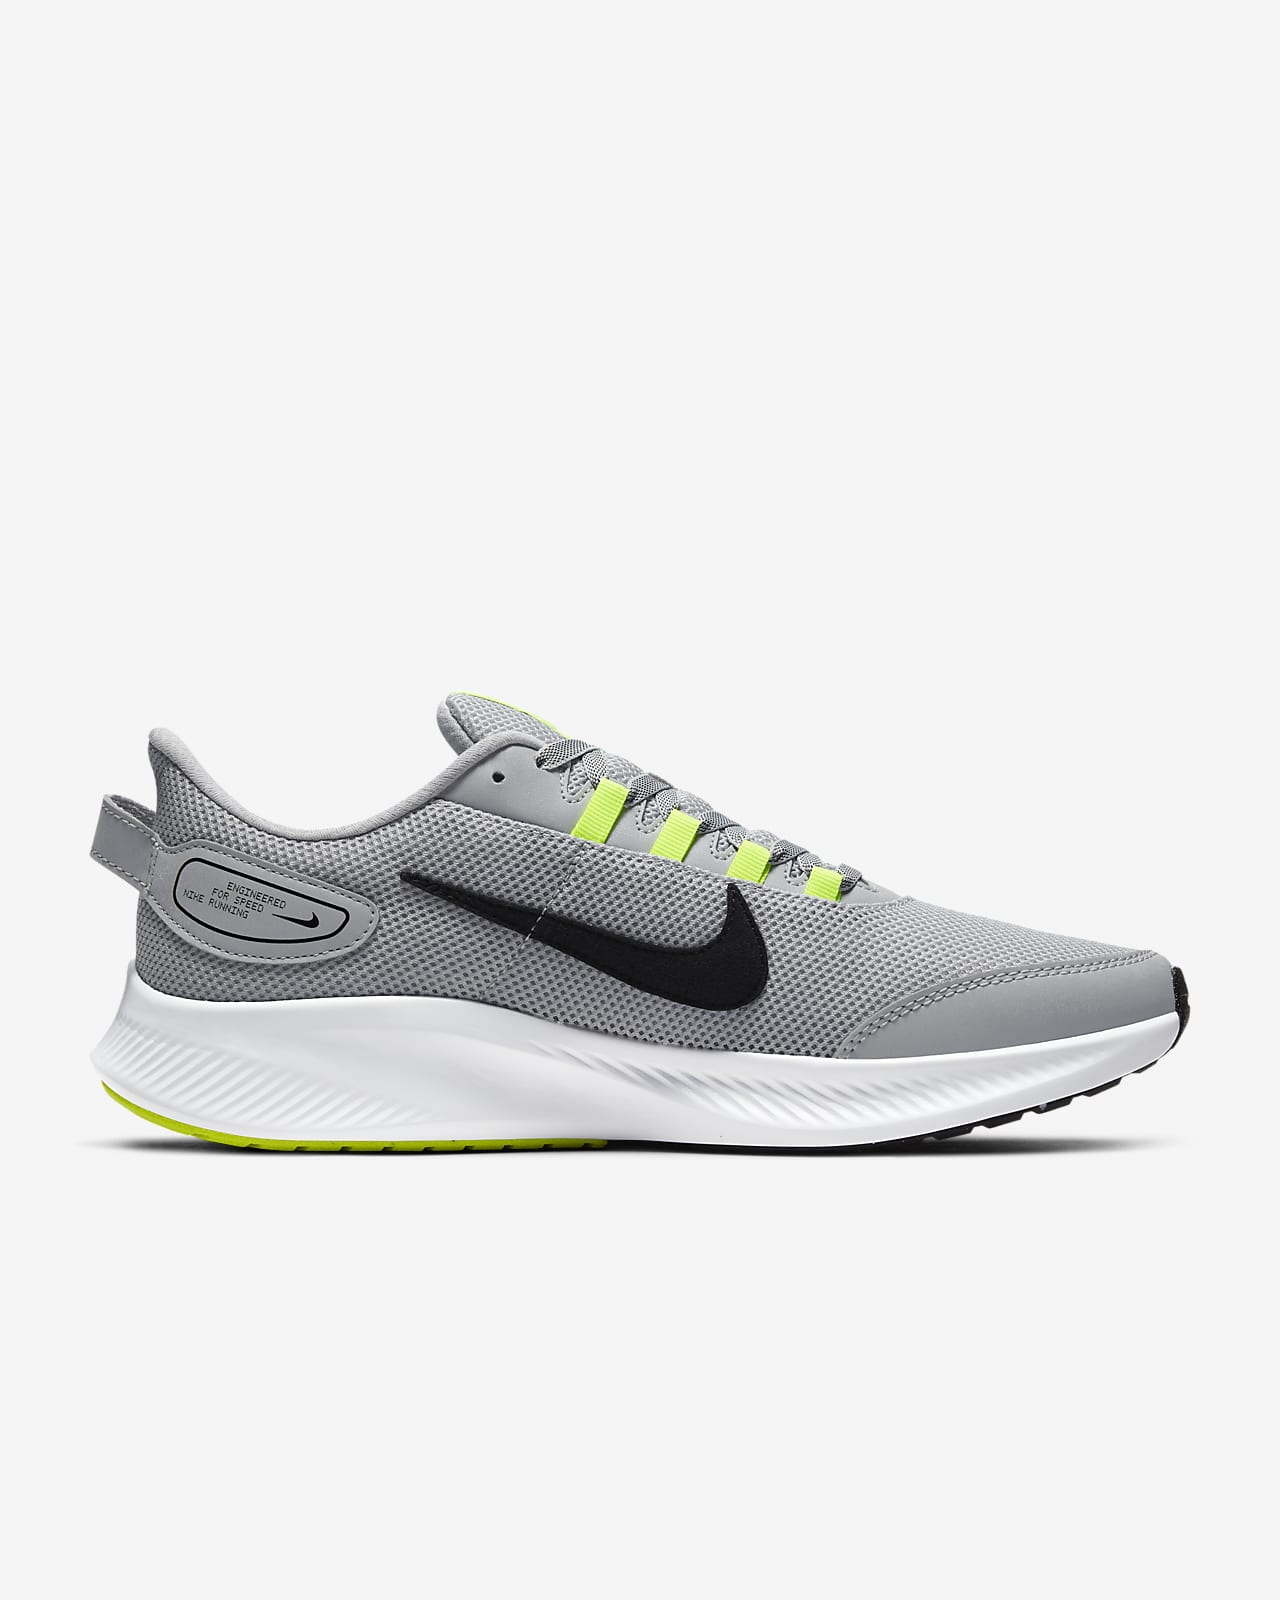 nike run all day 2 men's review